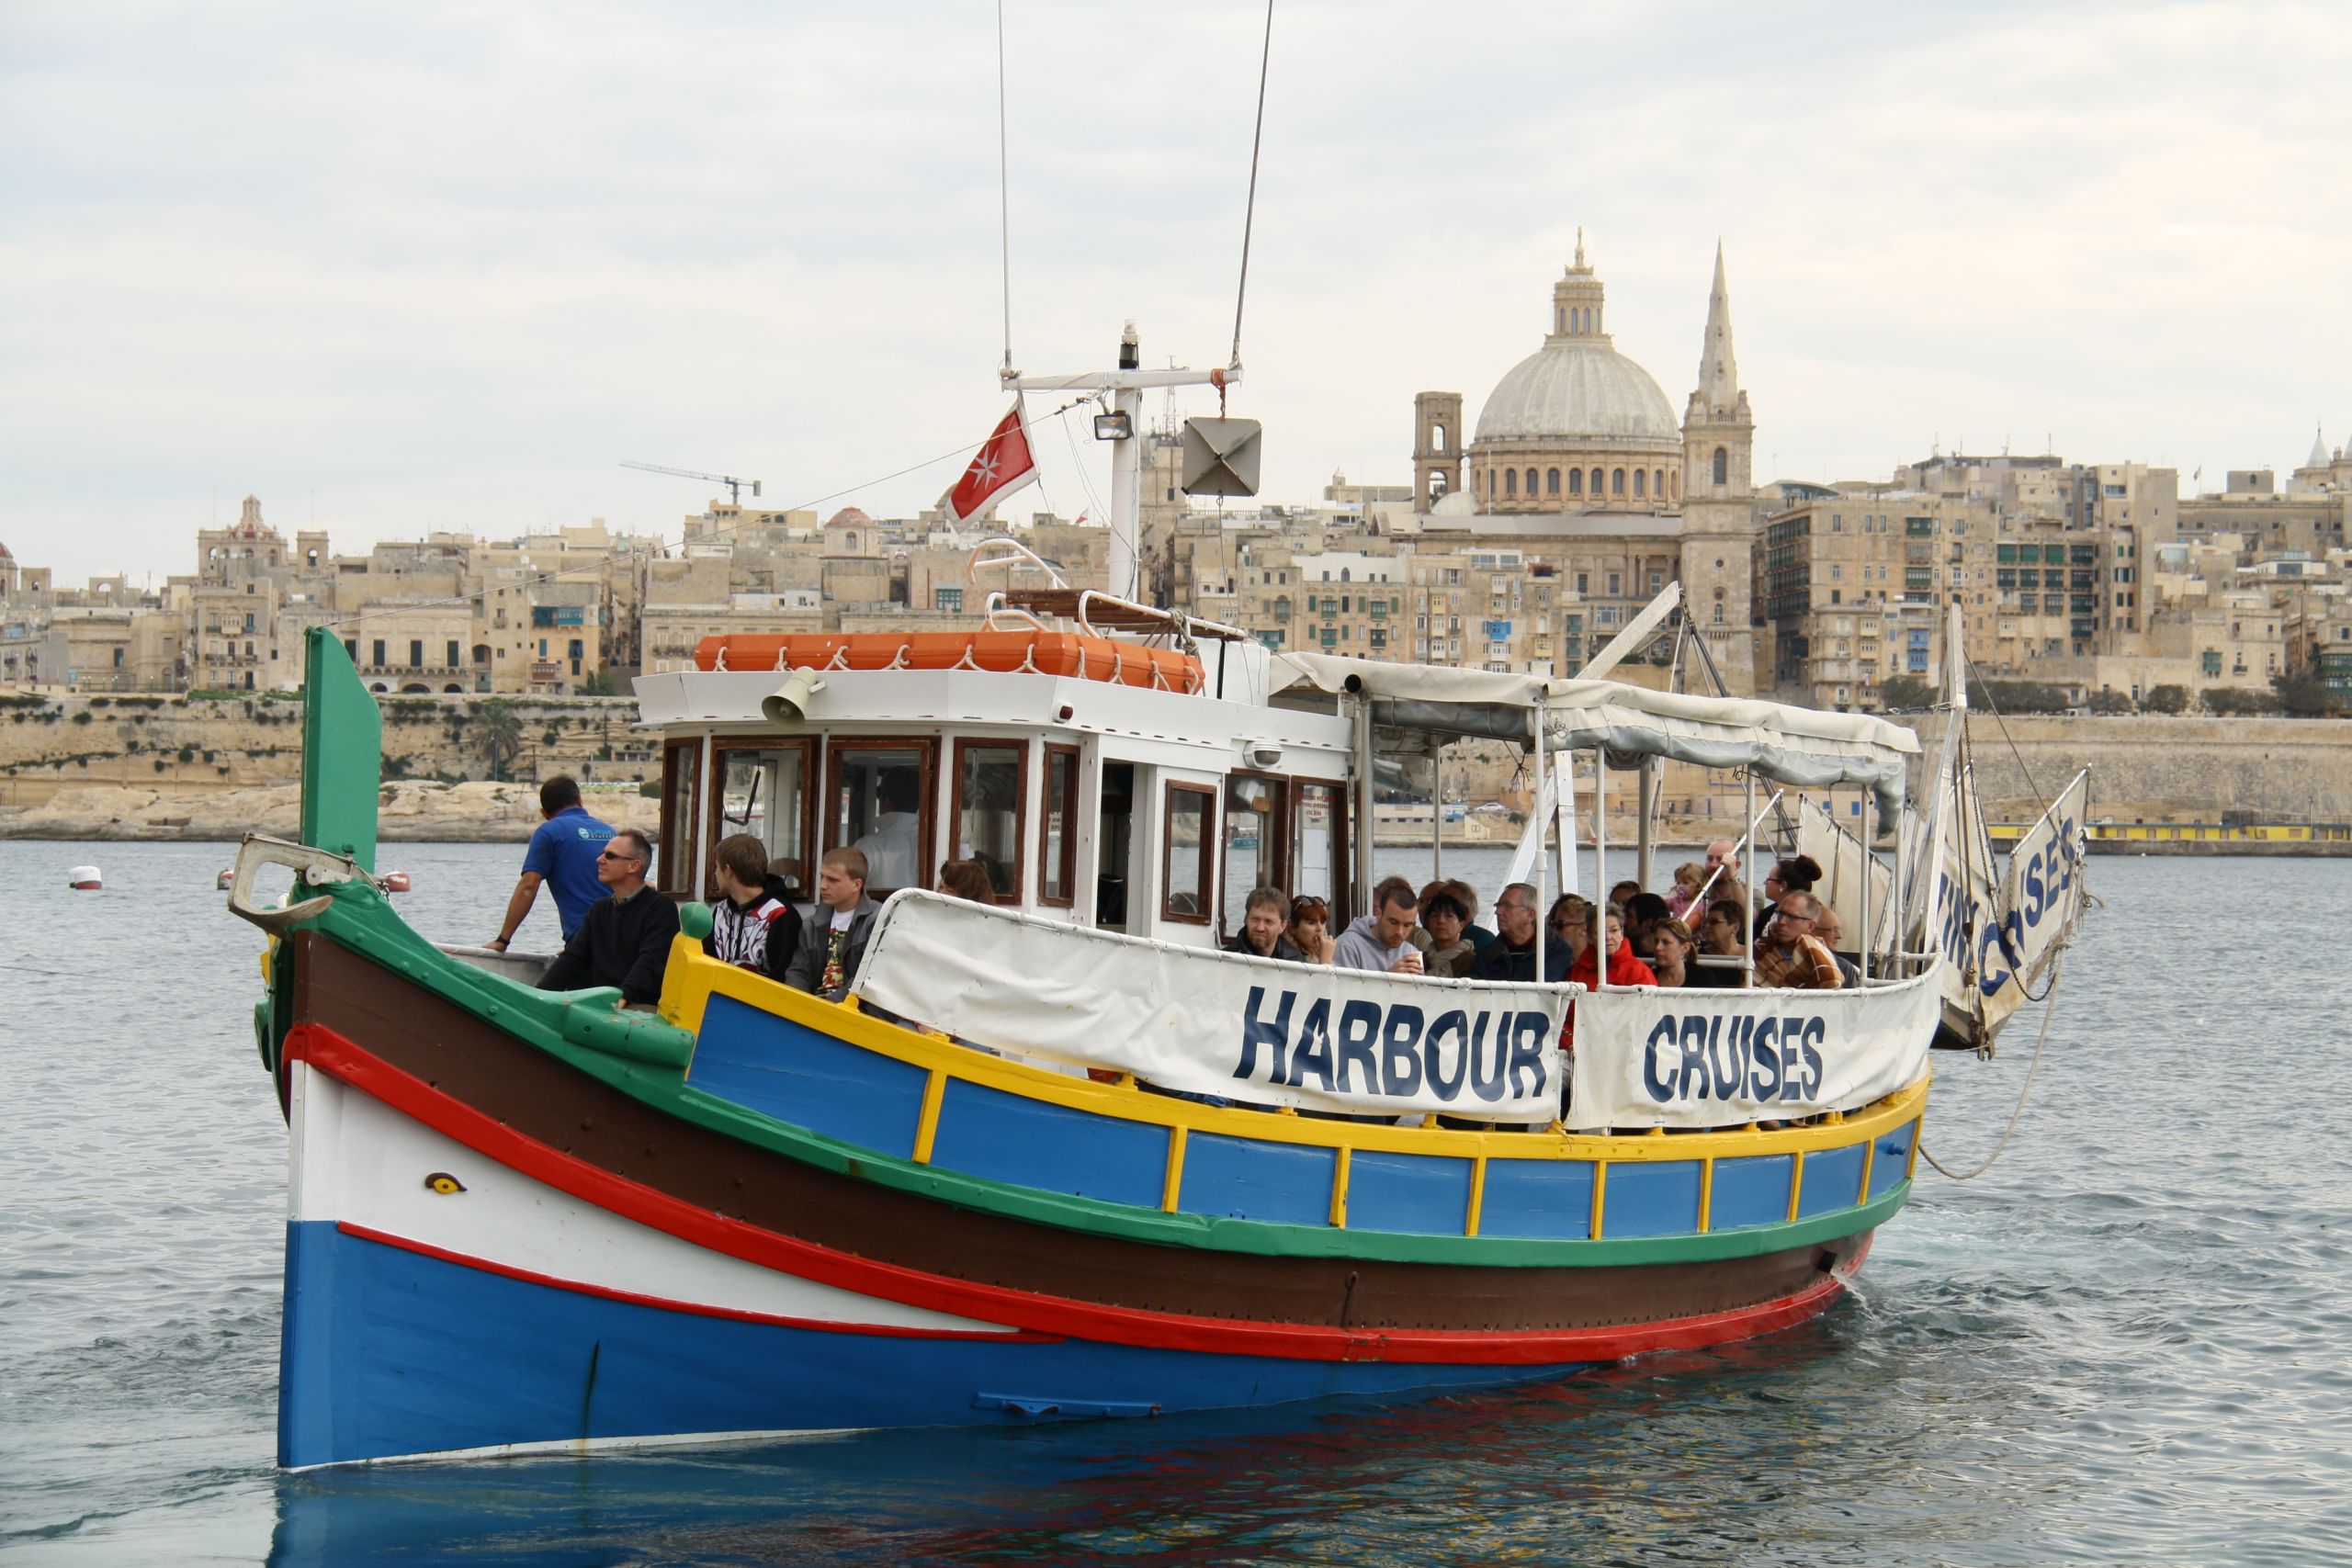 Harbour Cruise boat in Sliema